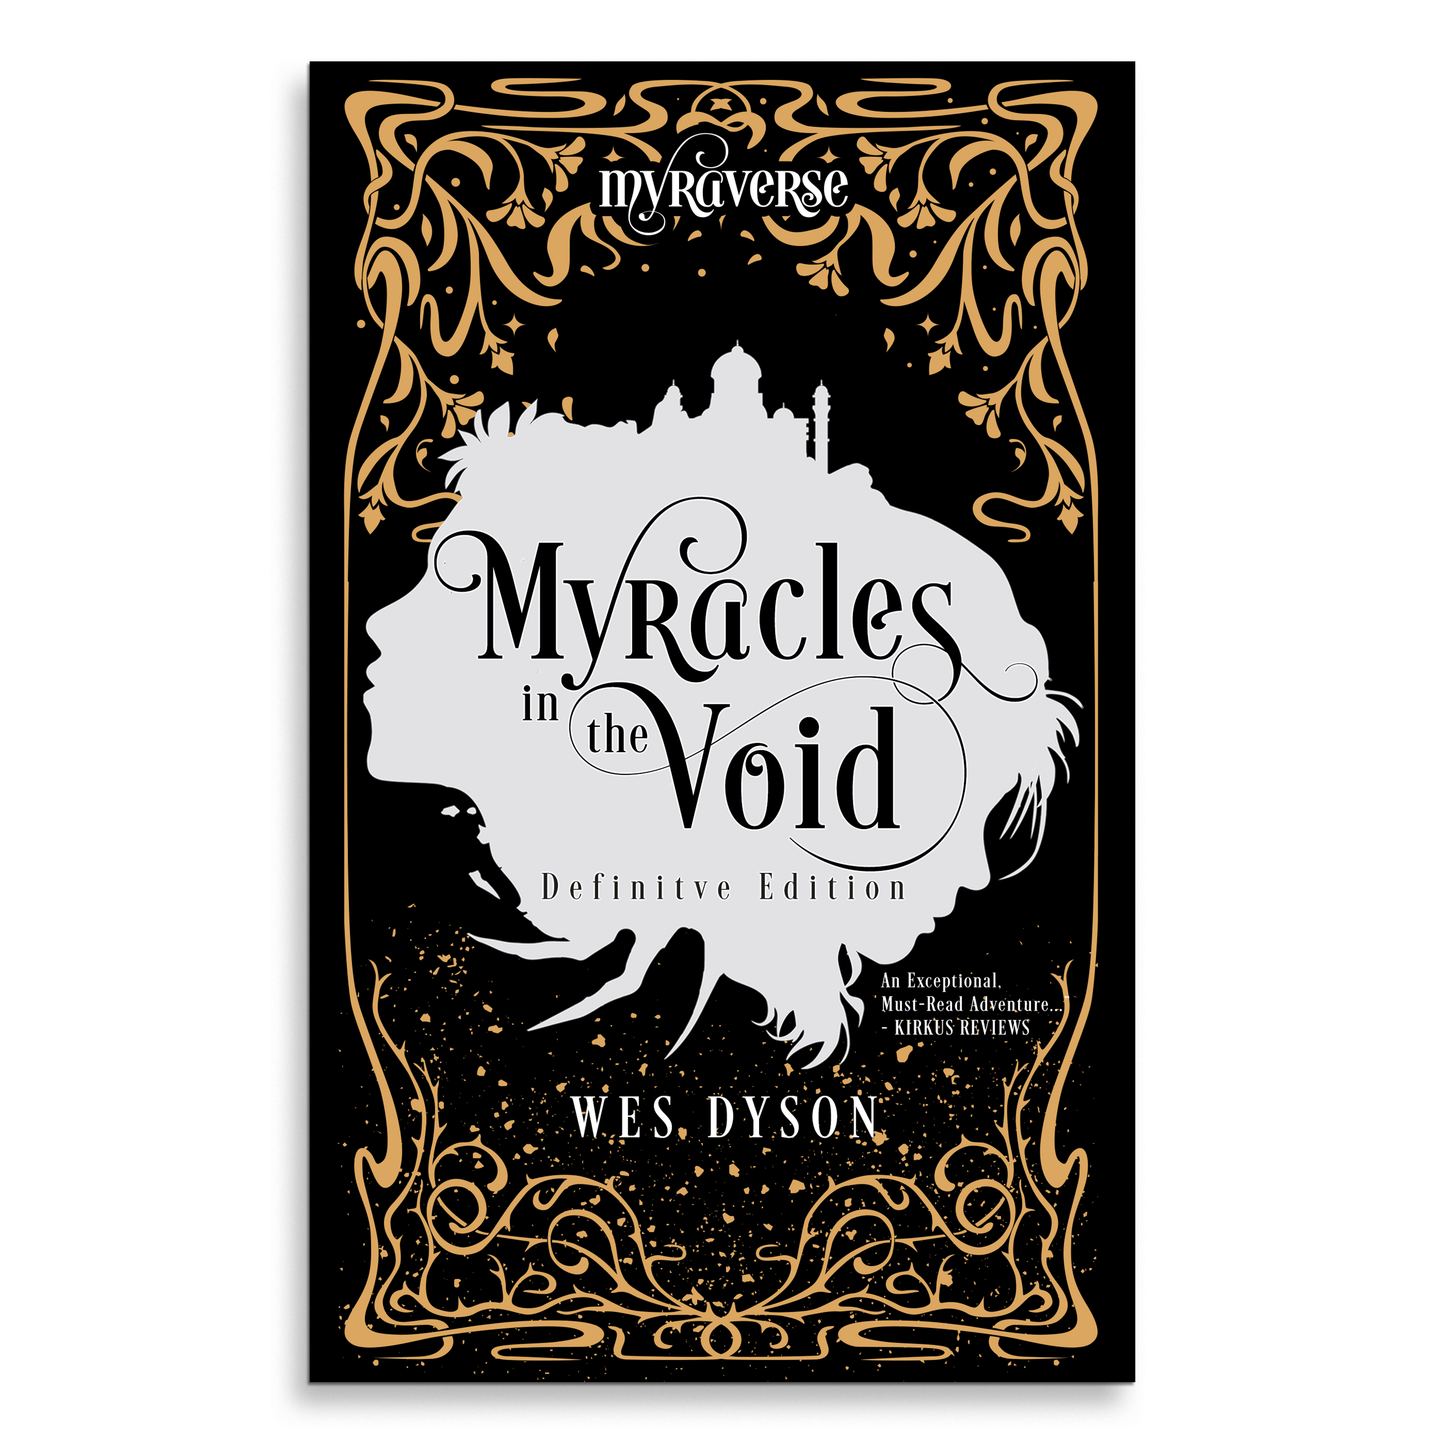 Myracles in the Void: Definitive Edition (Signed, Hardcover)